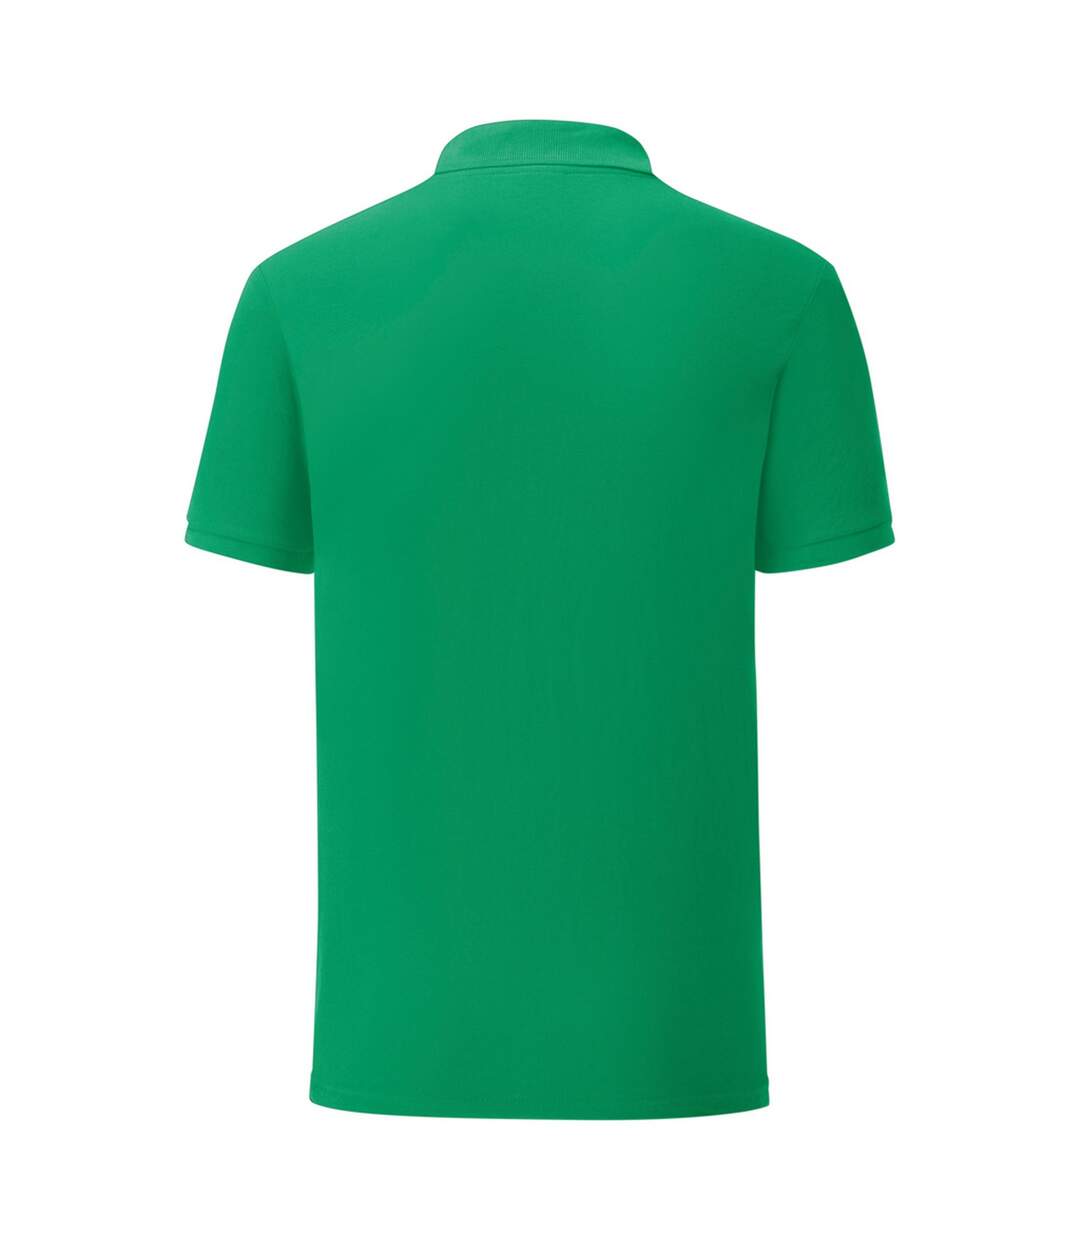 Fruit Of The Loom Mens Iconic Pique Polo Shirt (Kelly Green) - UTPC3571